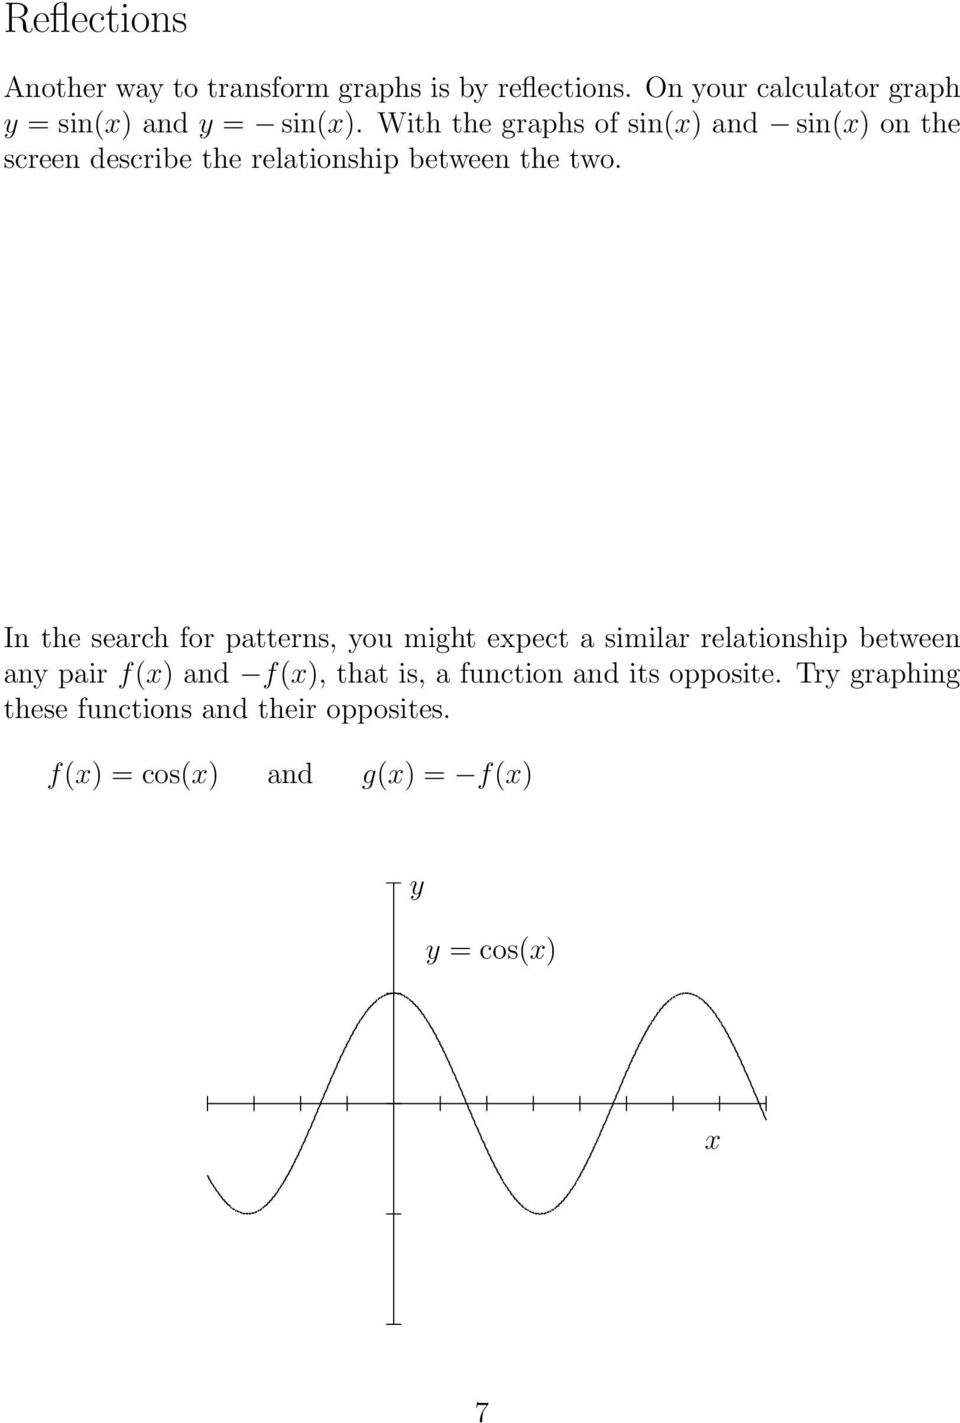 With the graphs of sin(x) and sin(x) on the screen describe the relationship between the two.